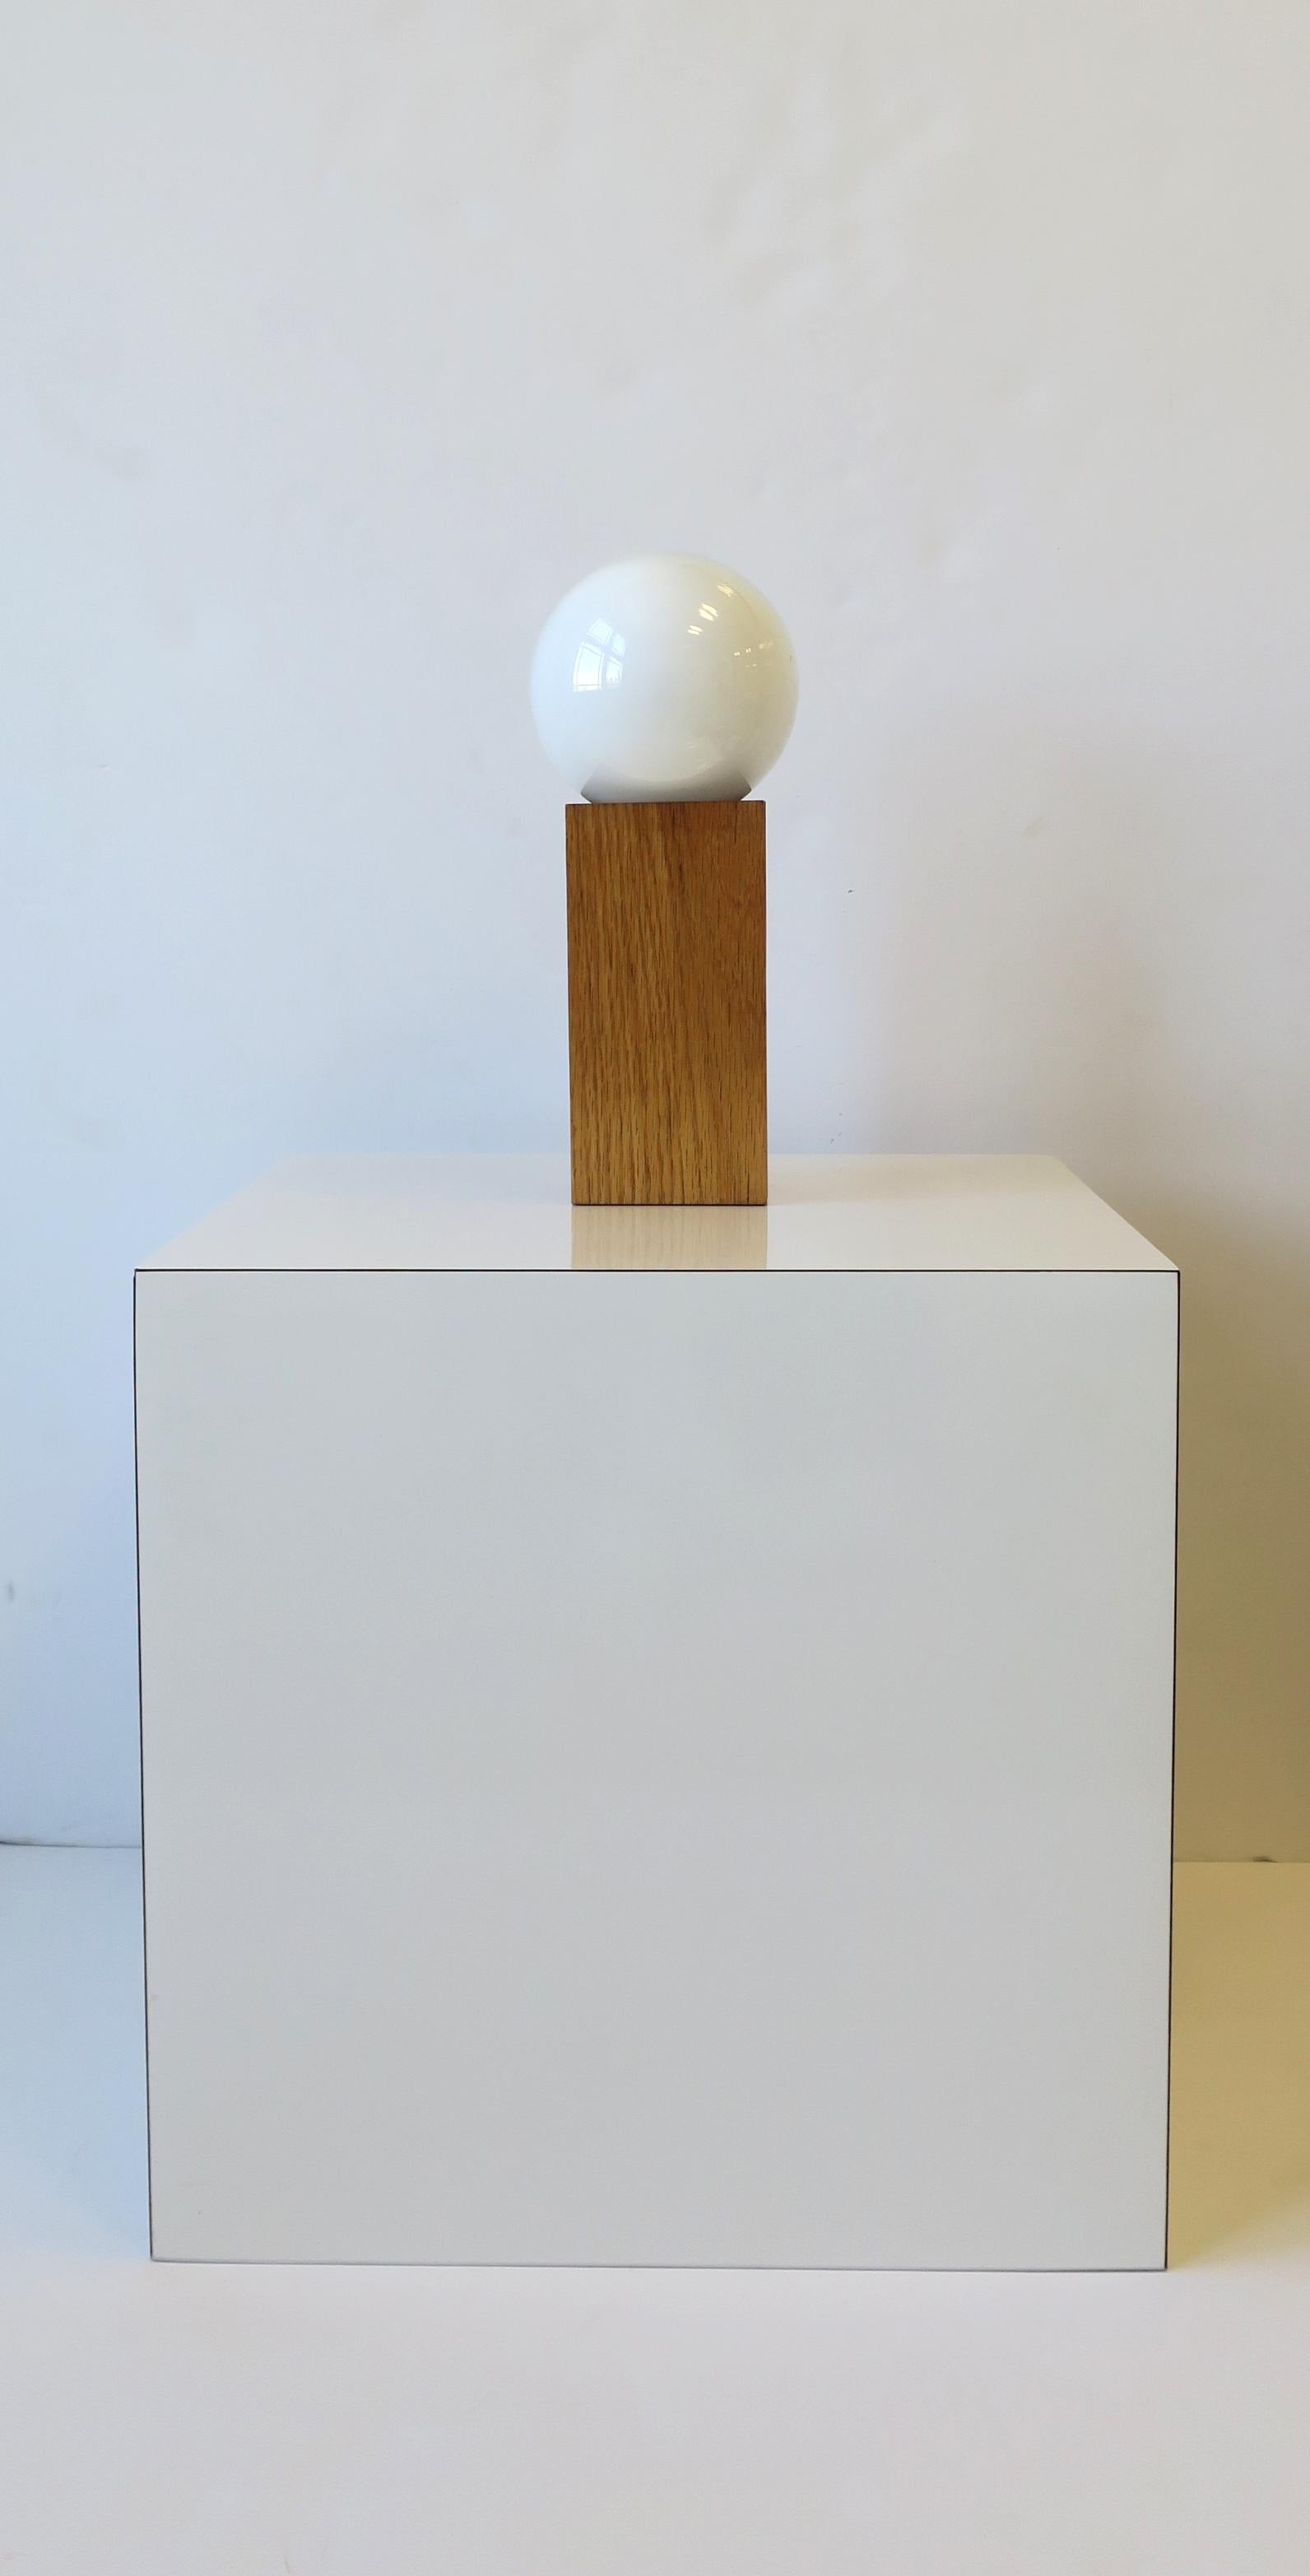 A '70s Modern or Postmodern period wood desk or table lamp with white globe-like lamp/bulb, circa late-20th century, 1970s, USA. In fine working order. On/Off switch on cord a shown. 

Dimensions: 4.25